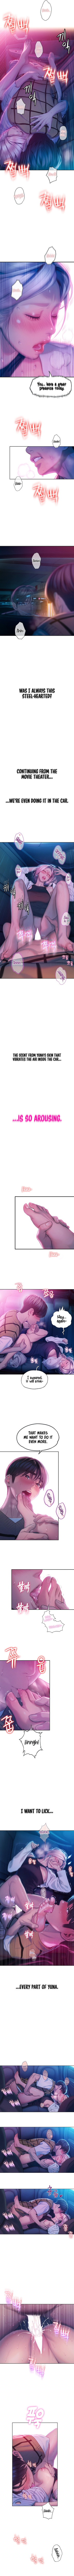 love-limit-exceeded-chap-22-2